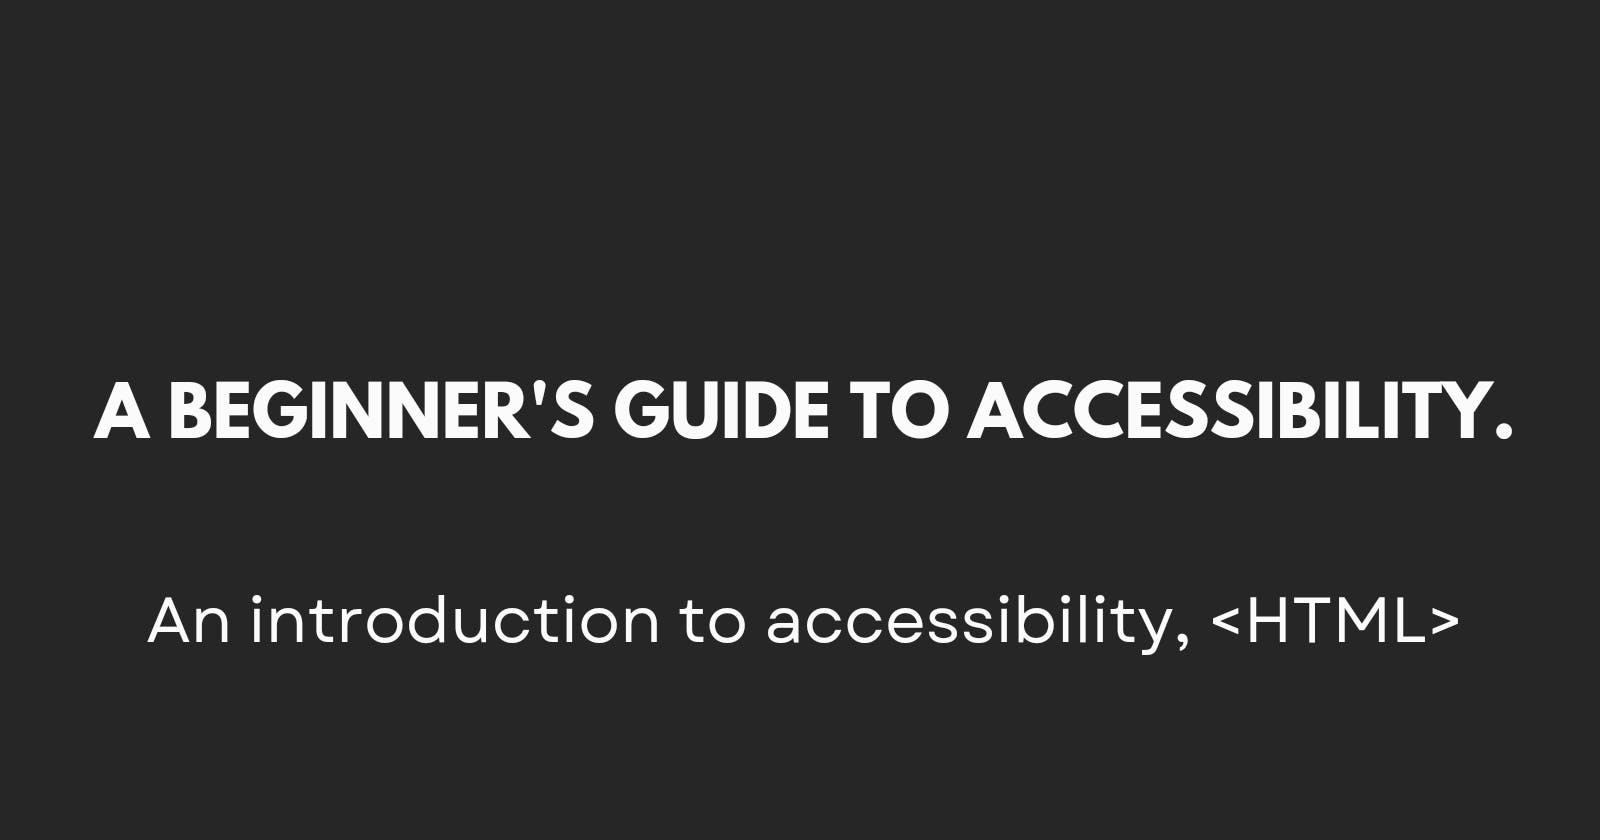 A beginner's guide to accessibility